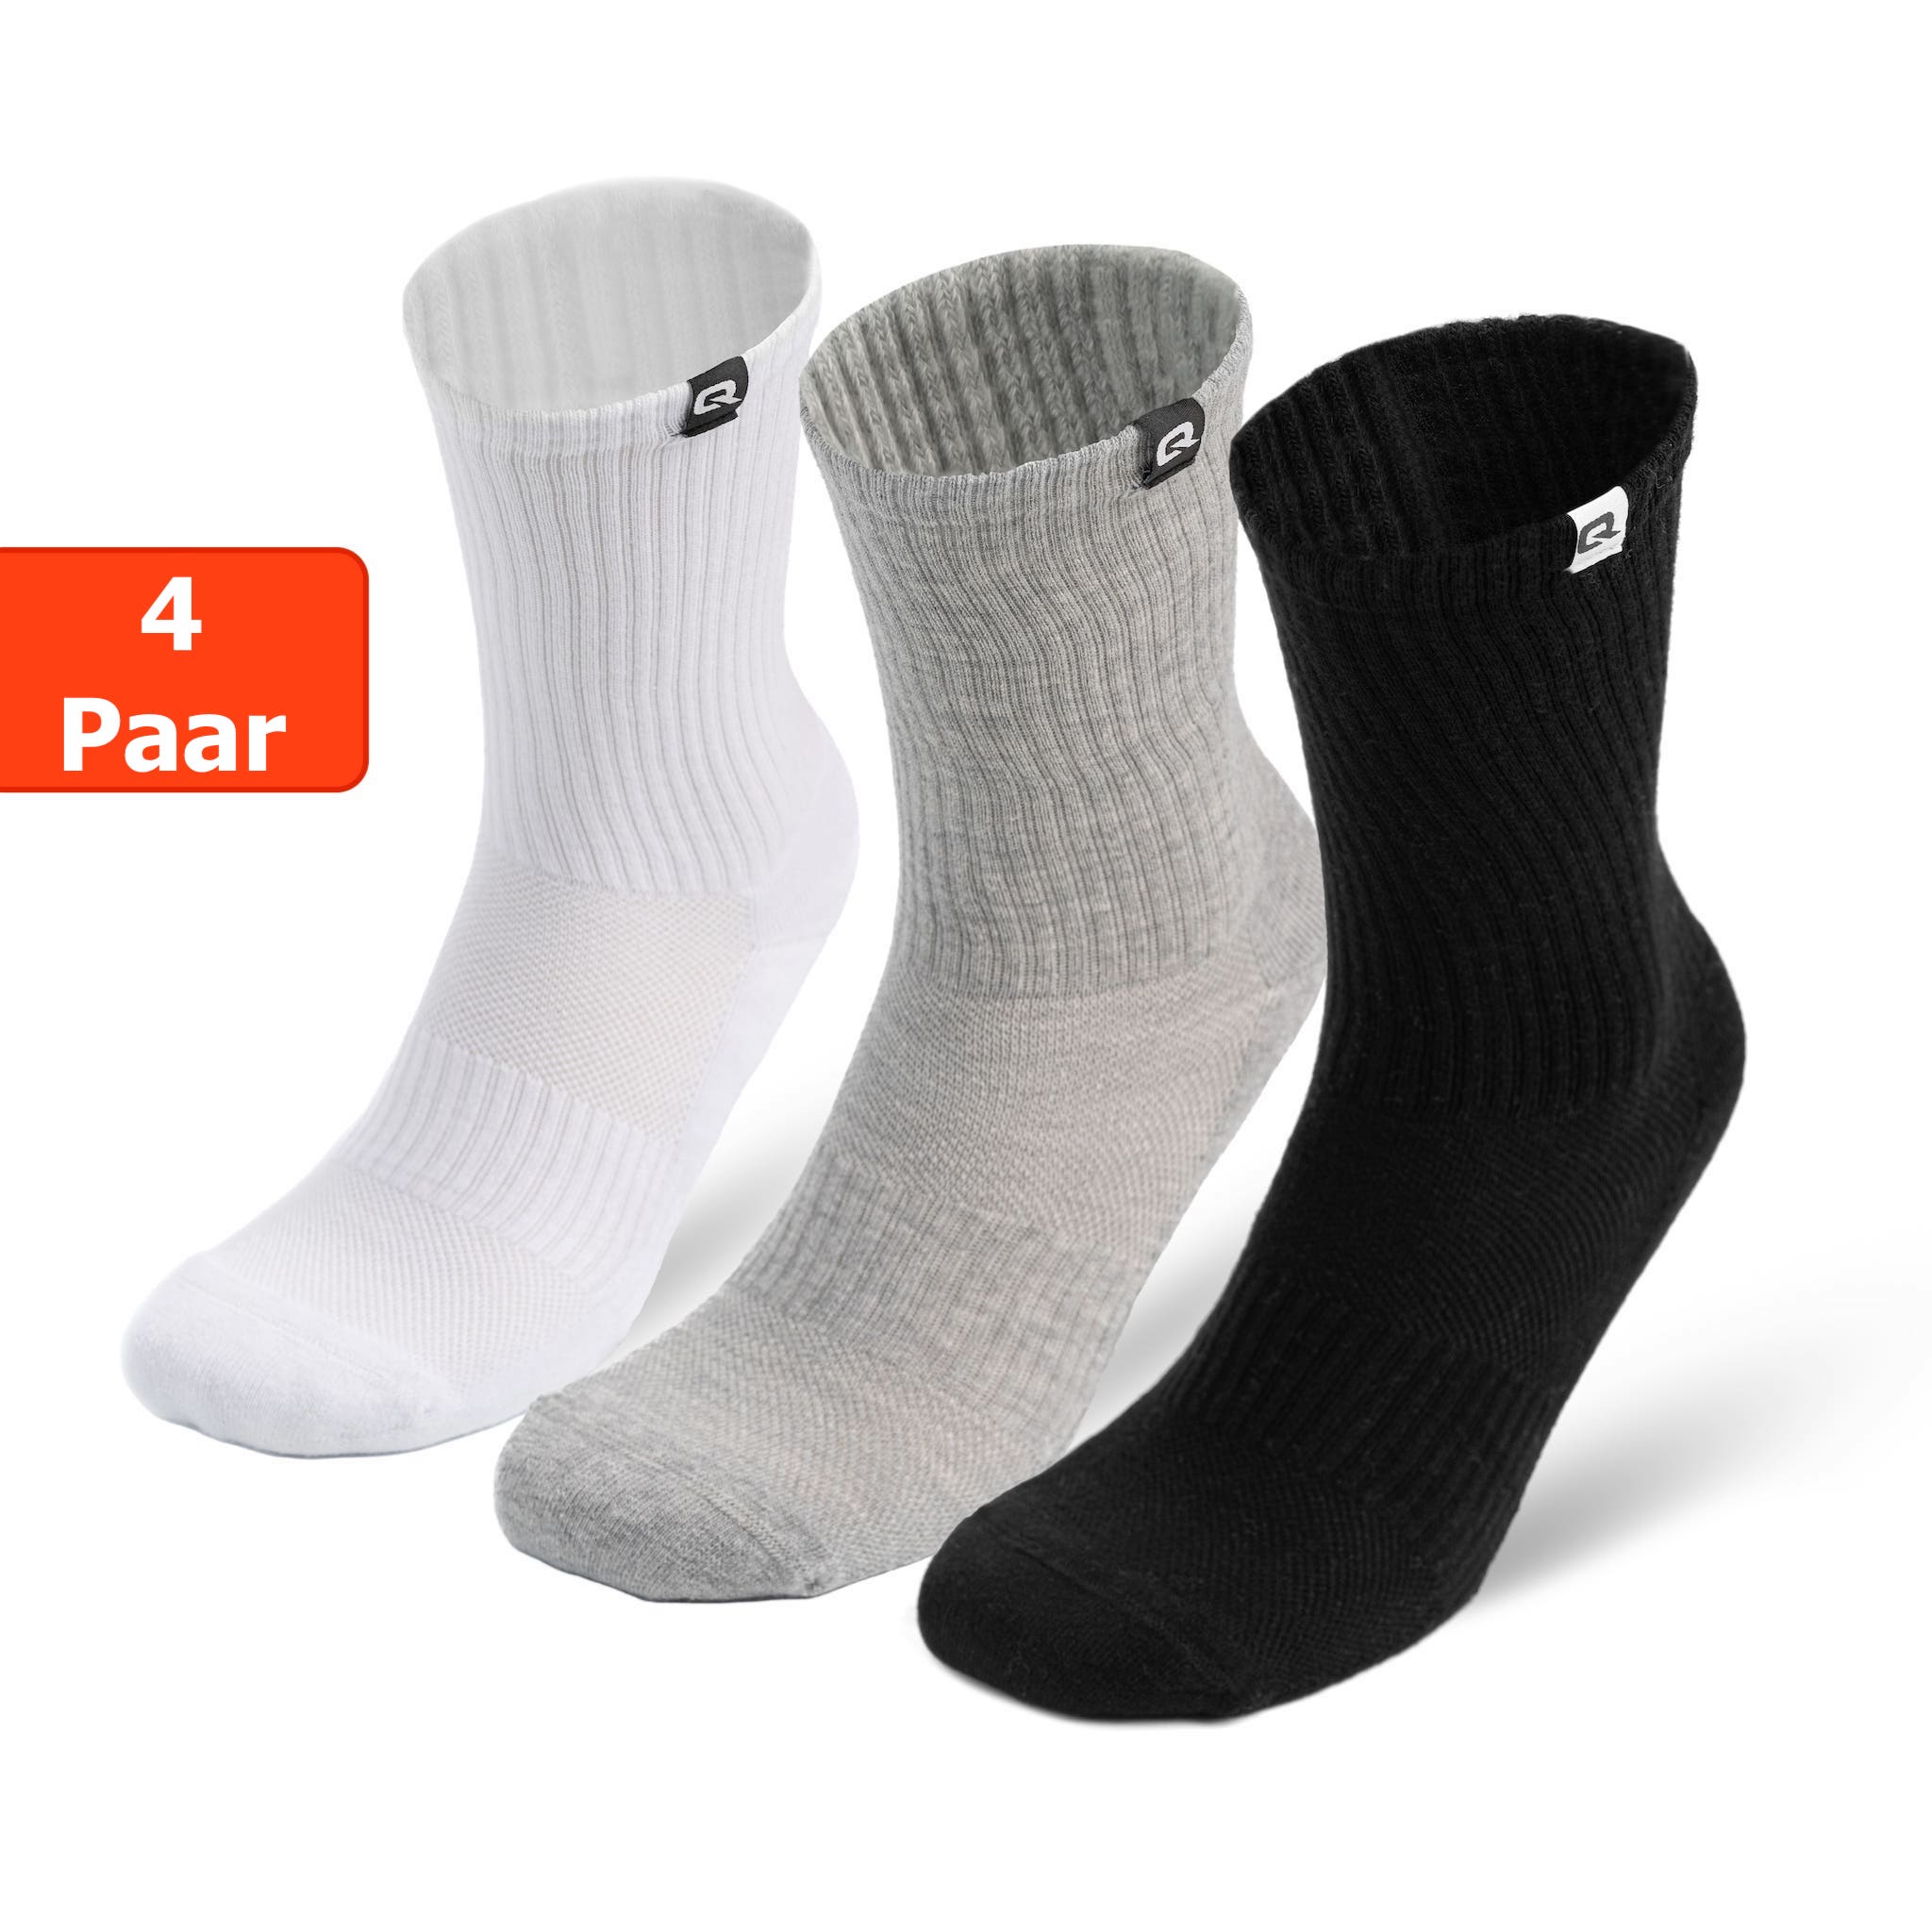 QSOCKS tennis socks 4 pairs made of high-quality cotton for men and women